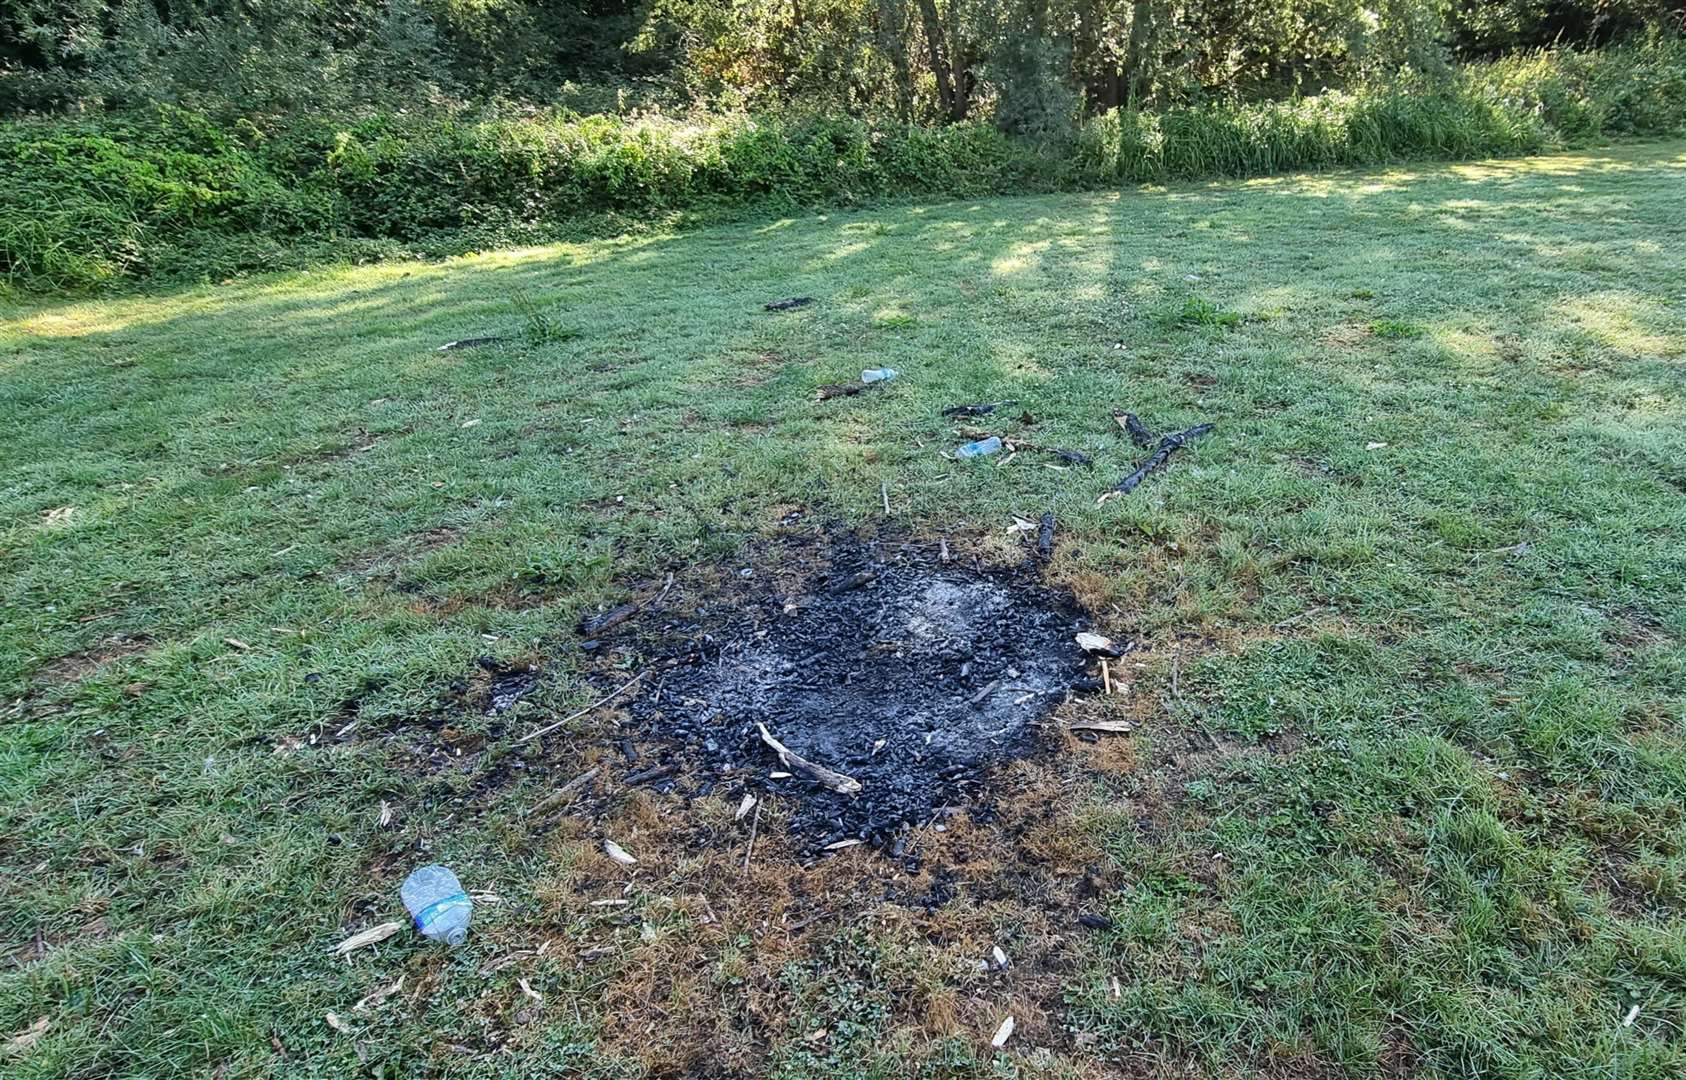 Simon Higgins says he is "terrified" for nearby houses and wildlife after discovering burnt patches of land at the park